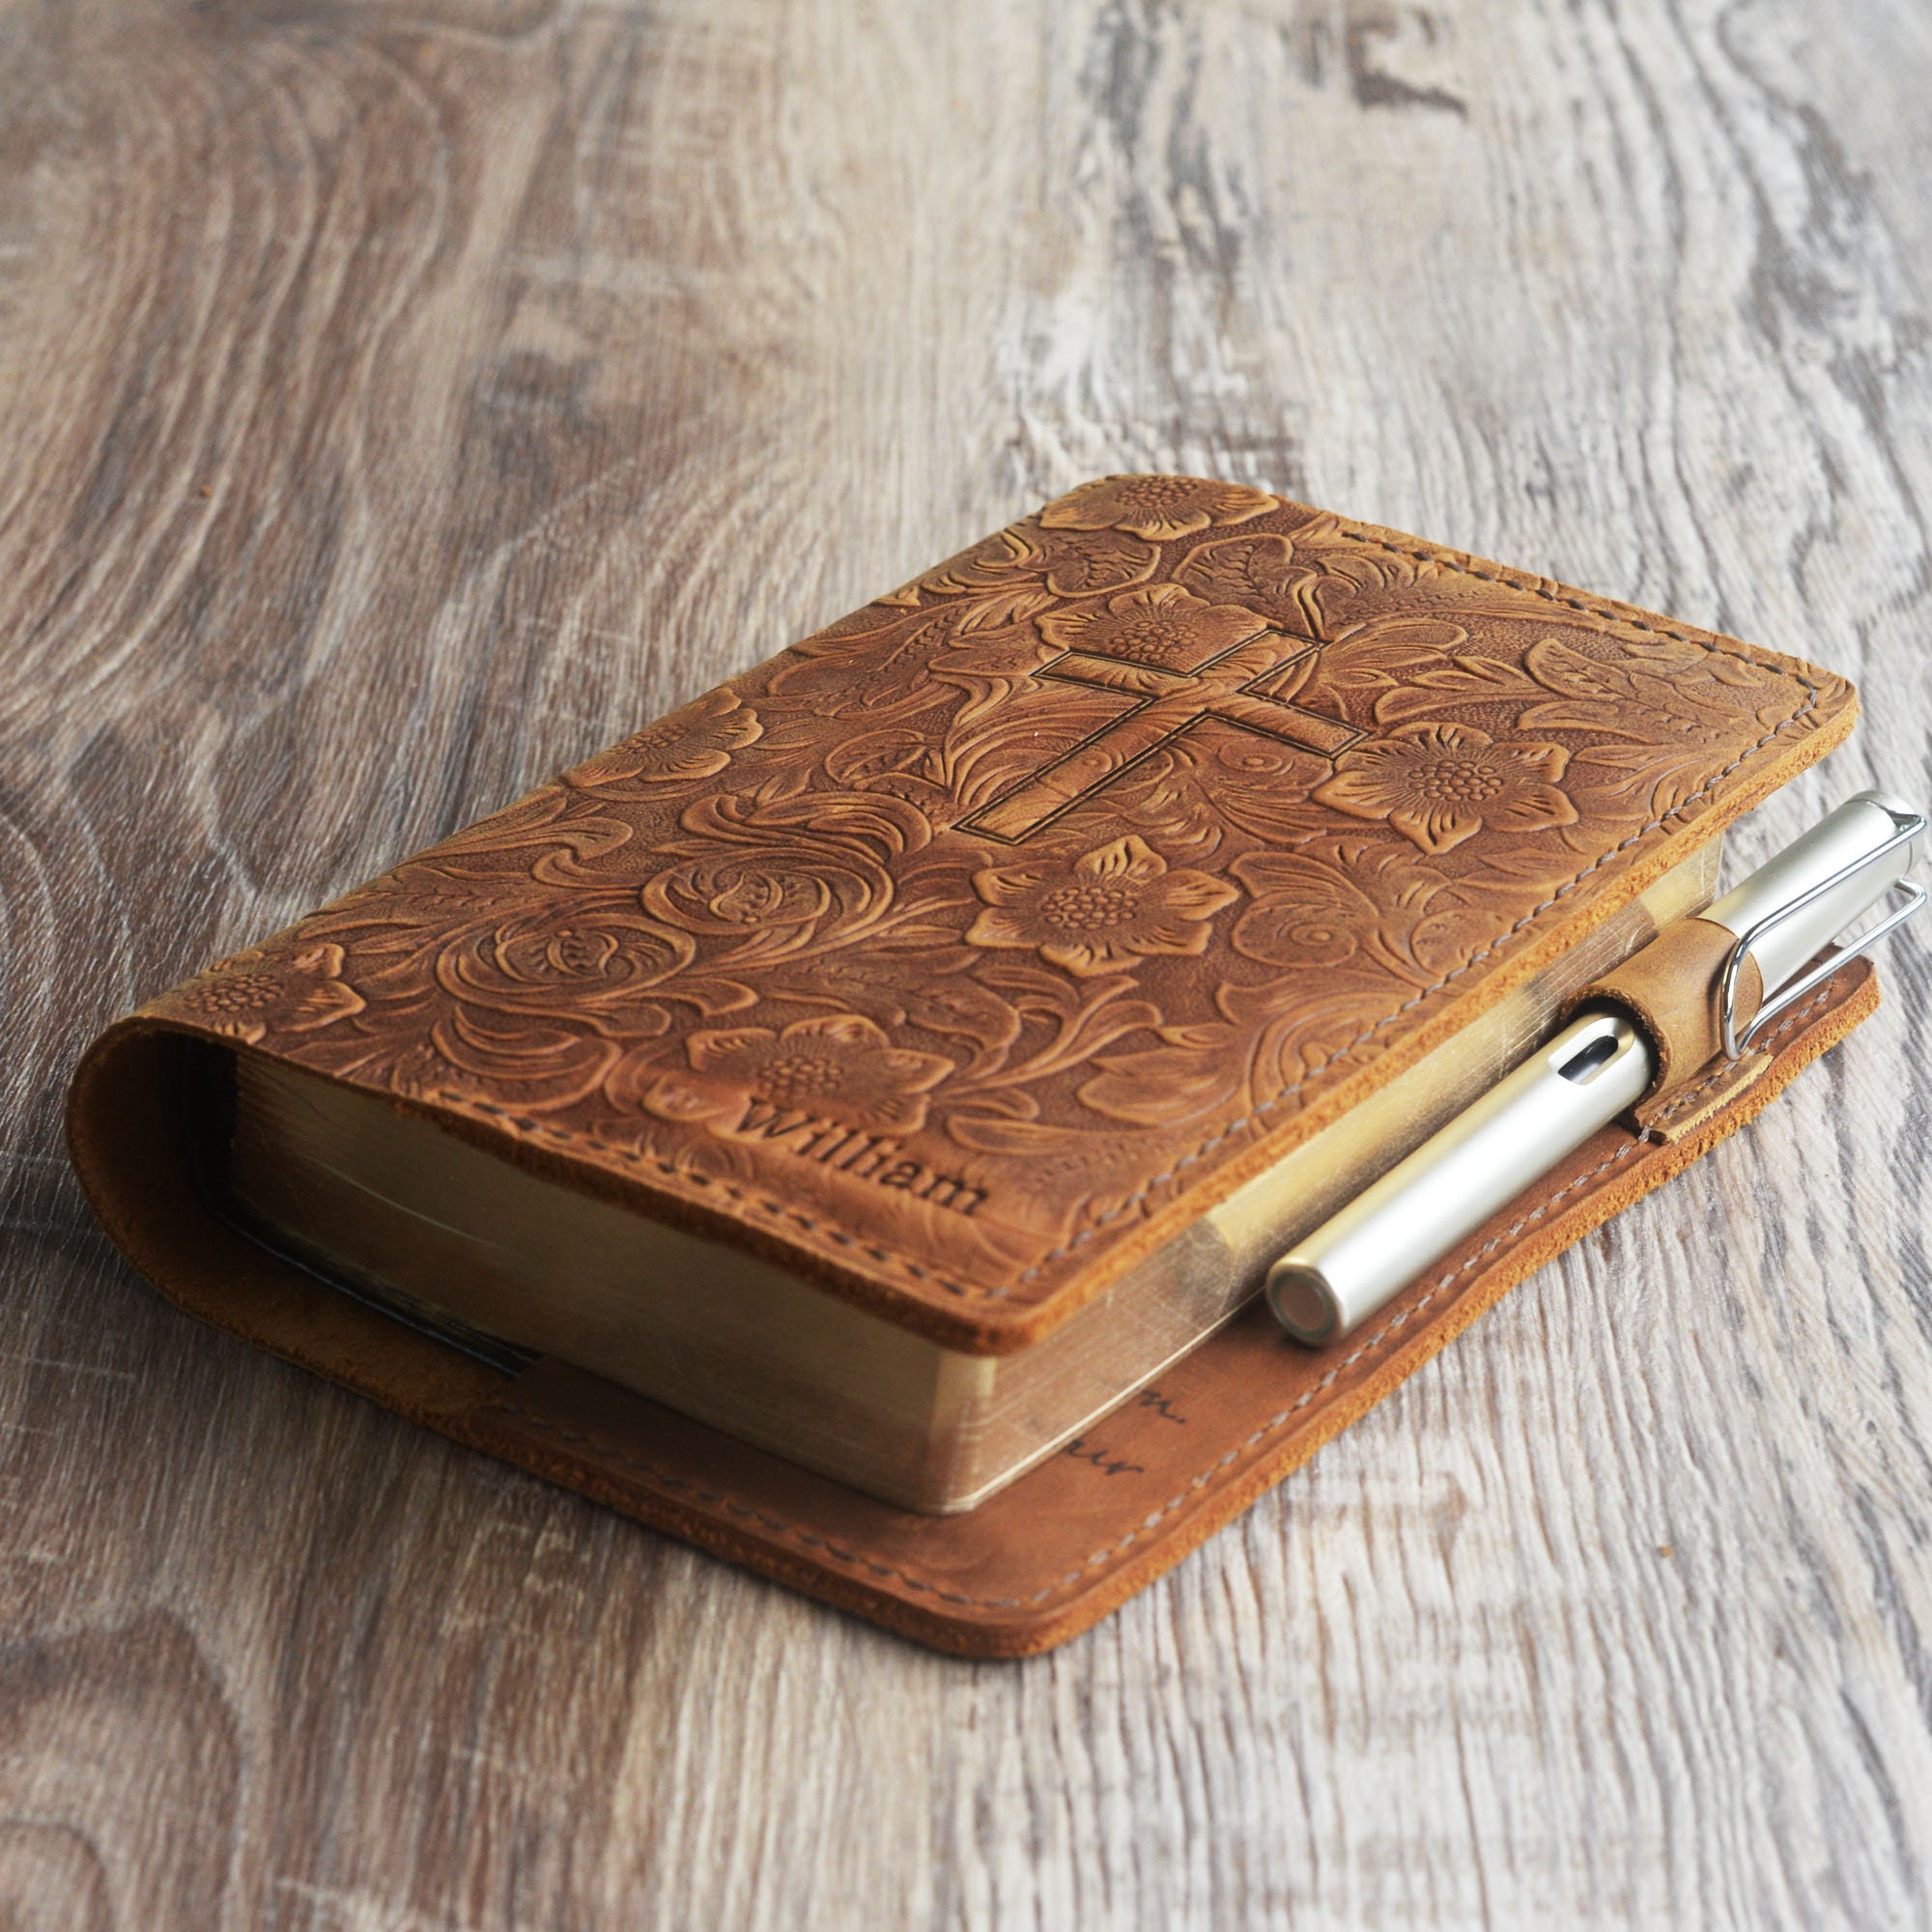 Genuine Tooled leather cover case for holy bible KJV , Christian gifts for  women